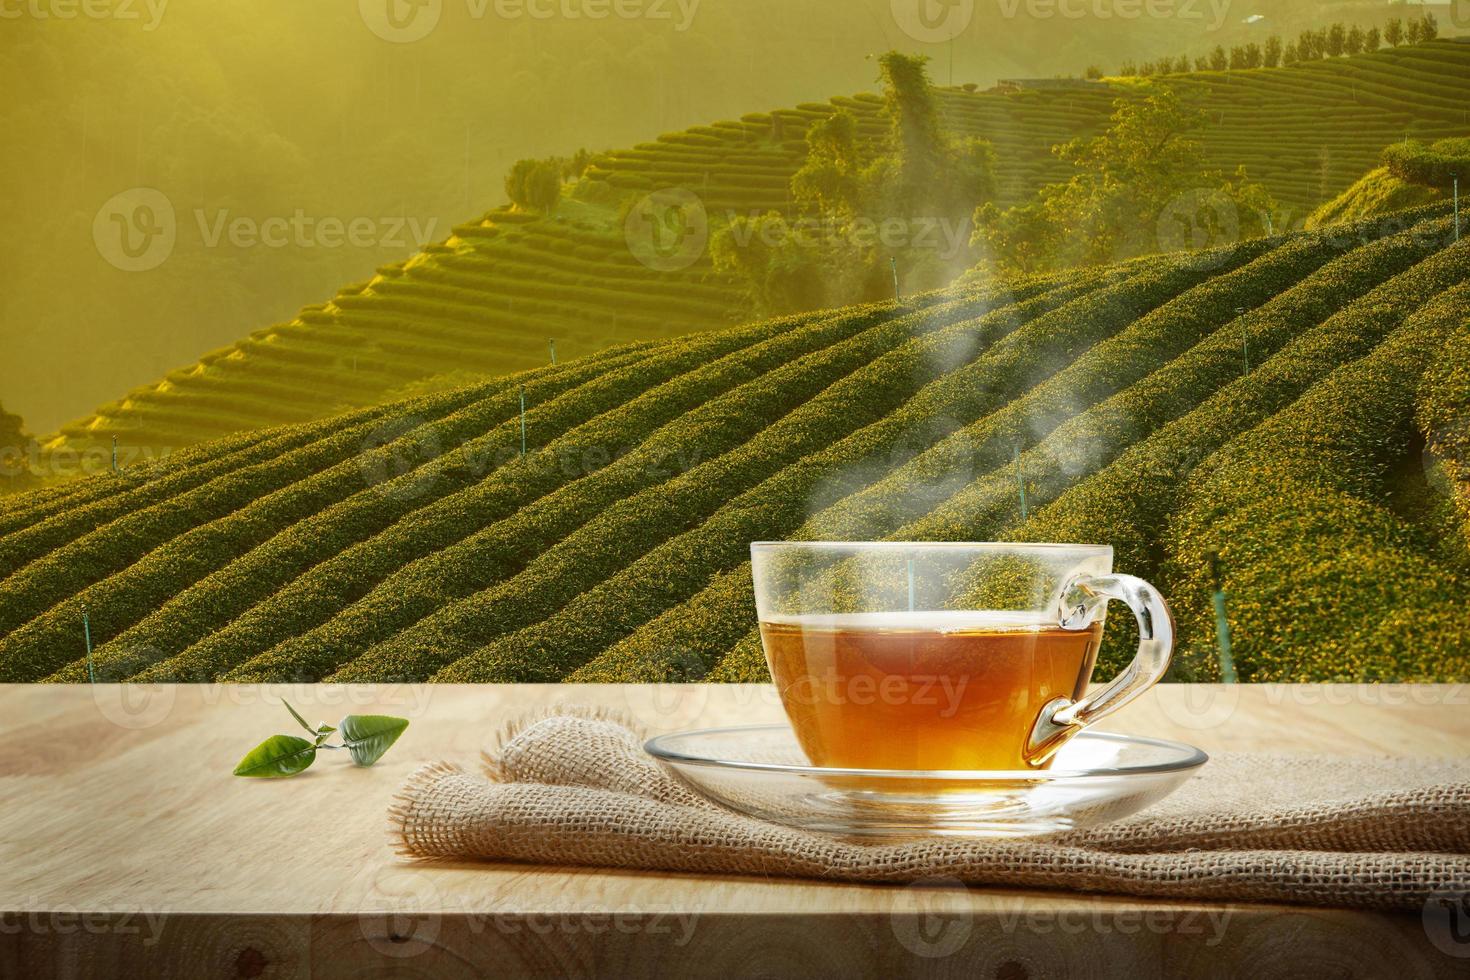 Cup of hot tea and tea leaf on the wooden table and the tea plantations background photo